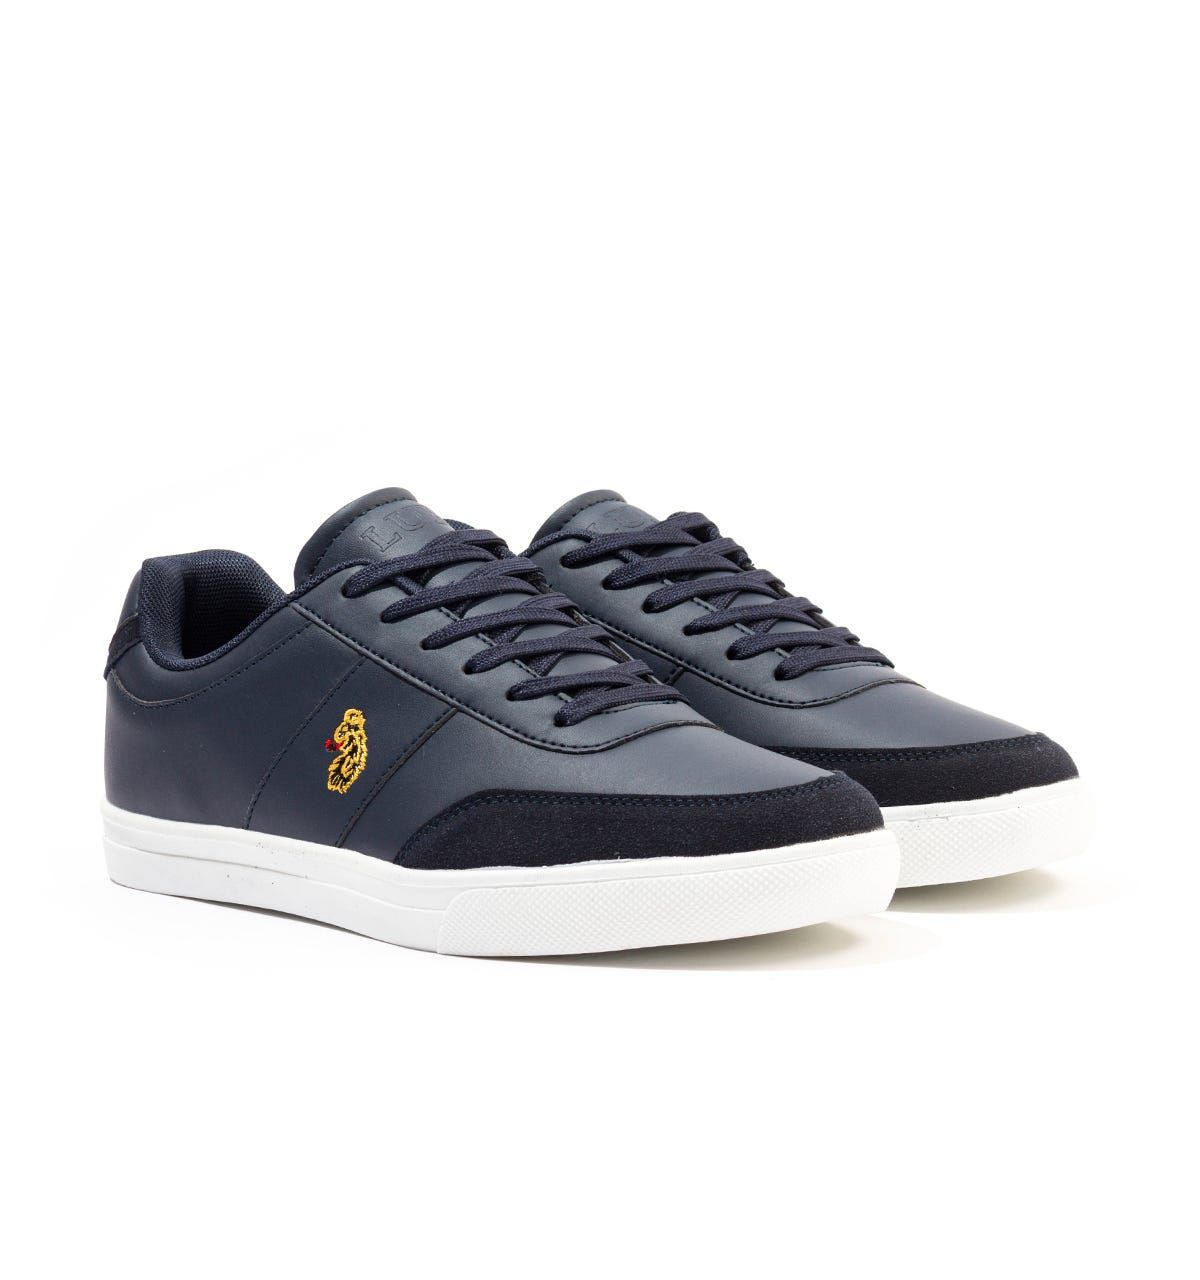 Luke 1977 is, without a doubt, the go-to brand if you\'re after well crafted, witty and masculine products. Finished with the signature Luke Lion logo, you\'re looking at one of the UK\'s top contemporary menswear brands.The Wells Trainers are crafted from durable PU leather uppers with suede trims, in a classic low-top style. Featuring a six eyelet lace up and signature Luke branding to the heel, tongue and side.PU Leather UppersTextile LiningPU Suede TrimsRubber CupsolesLow-Top StyleSix Eyelet Lace UpLuke 1977 Branding